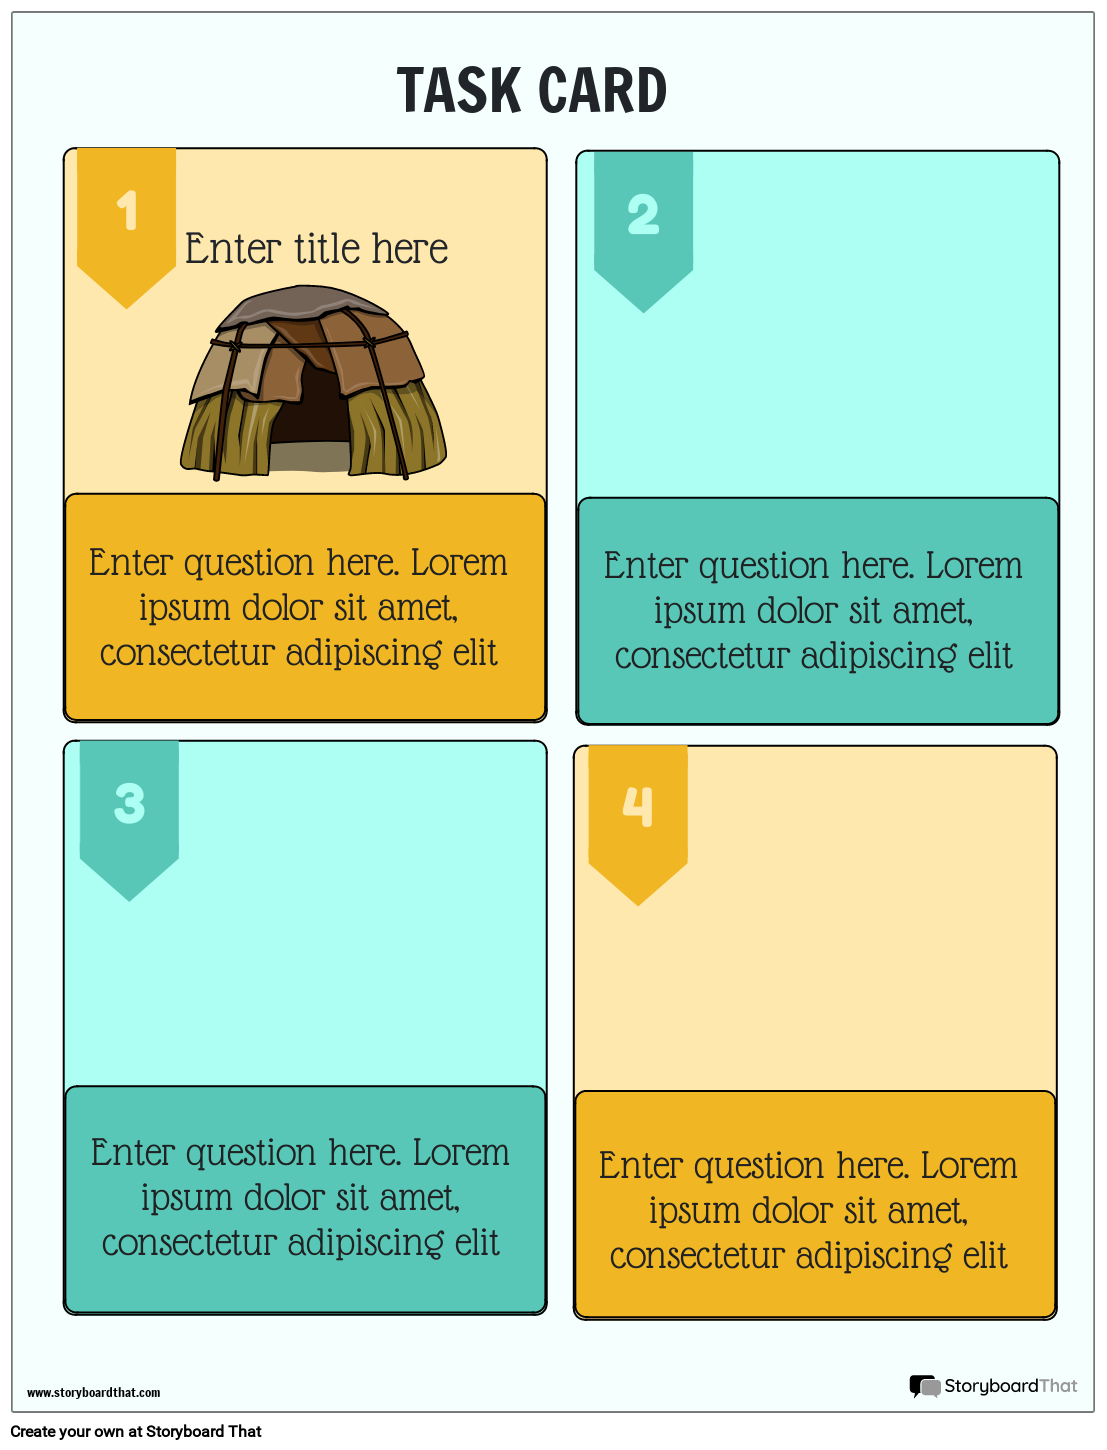 Task card for learning activities